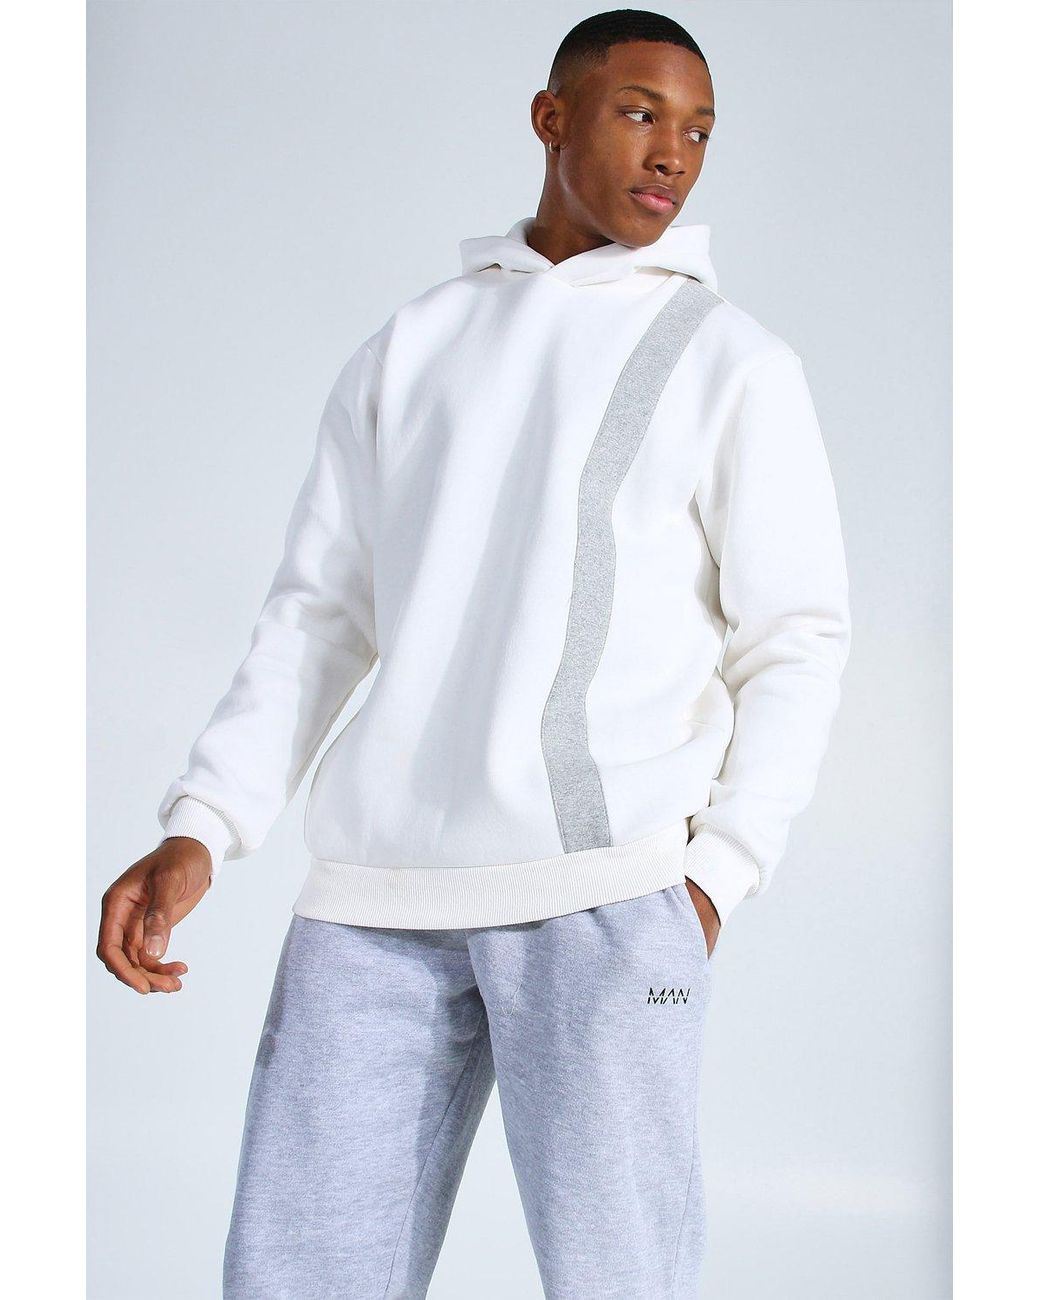 BoohooMAN Colour Block Hoodie in Cream (White) for Men - Lyst